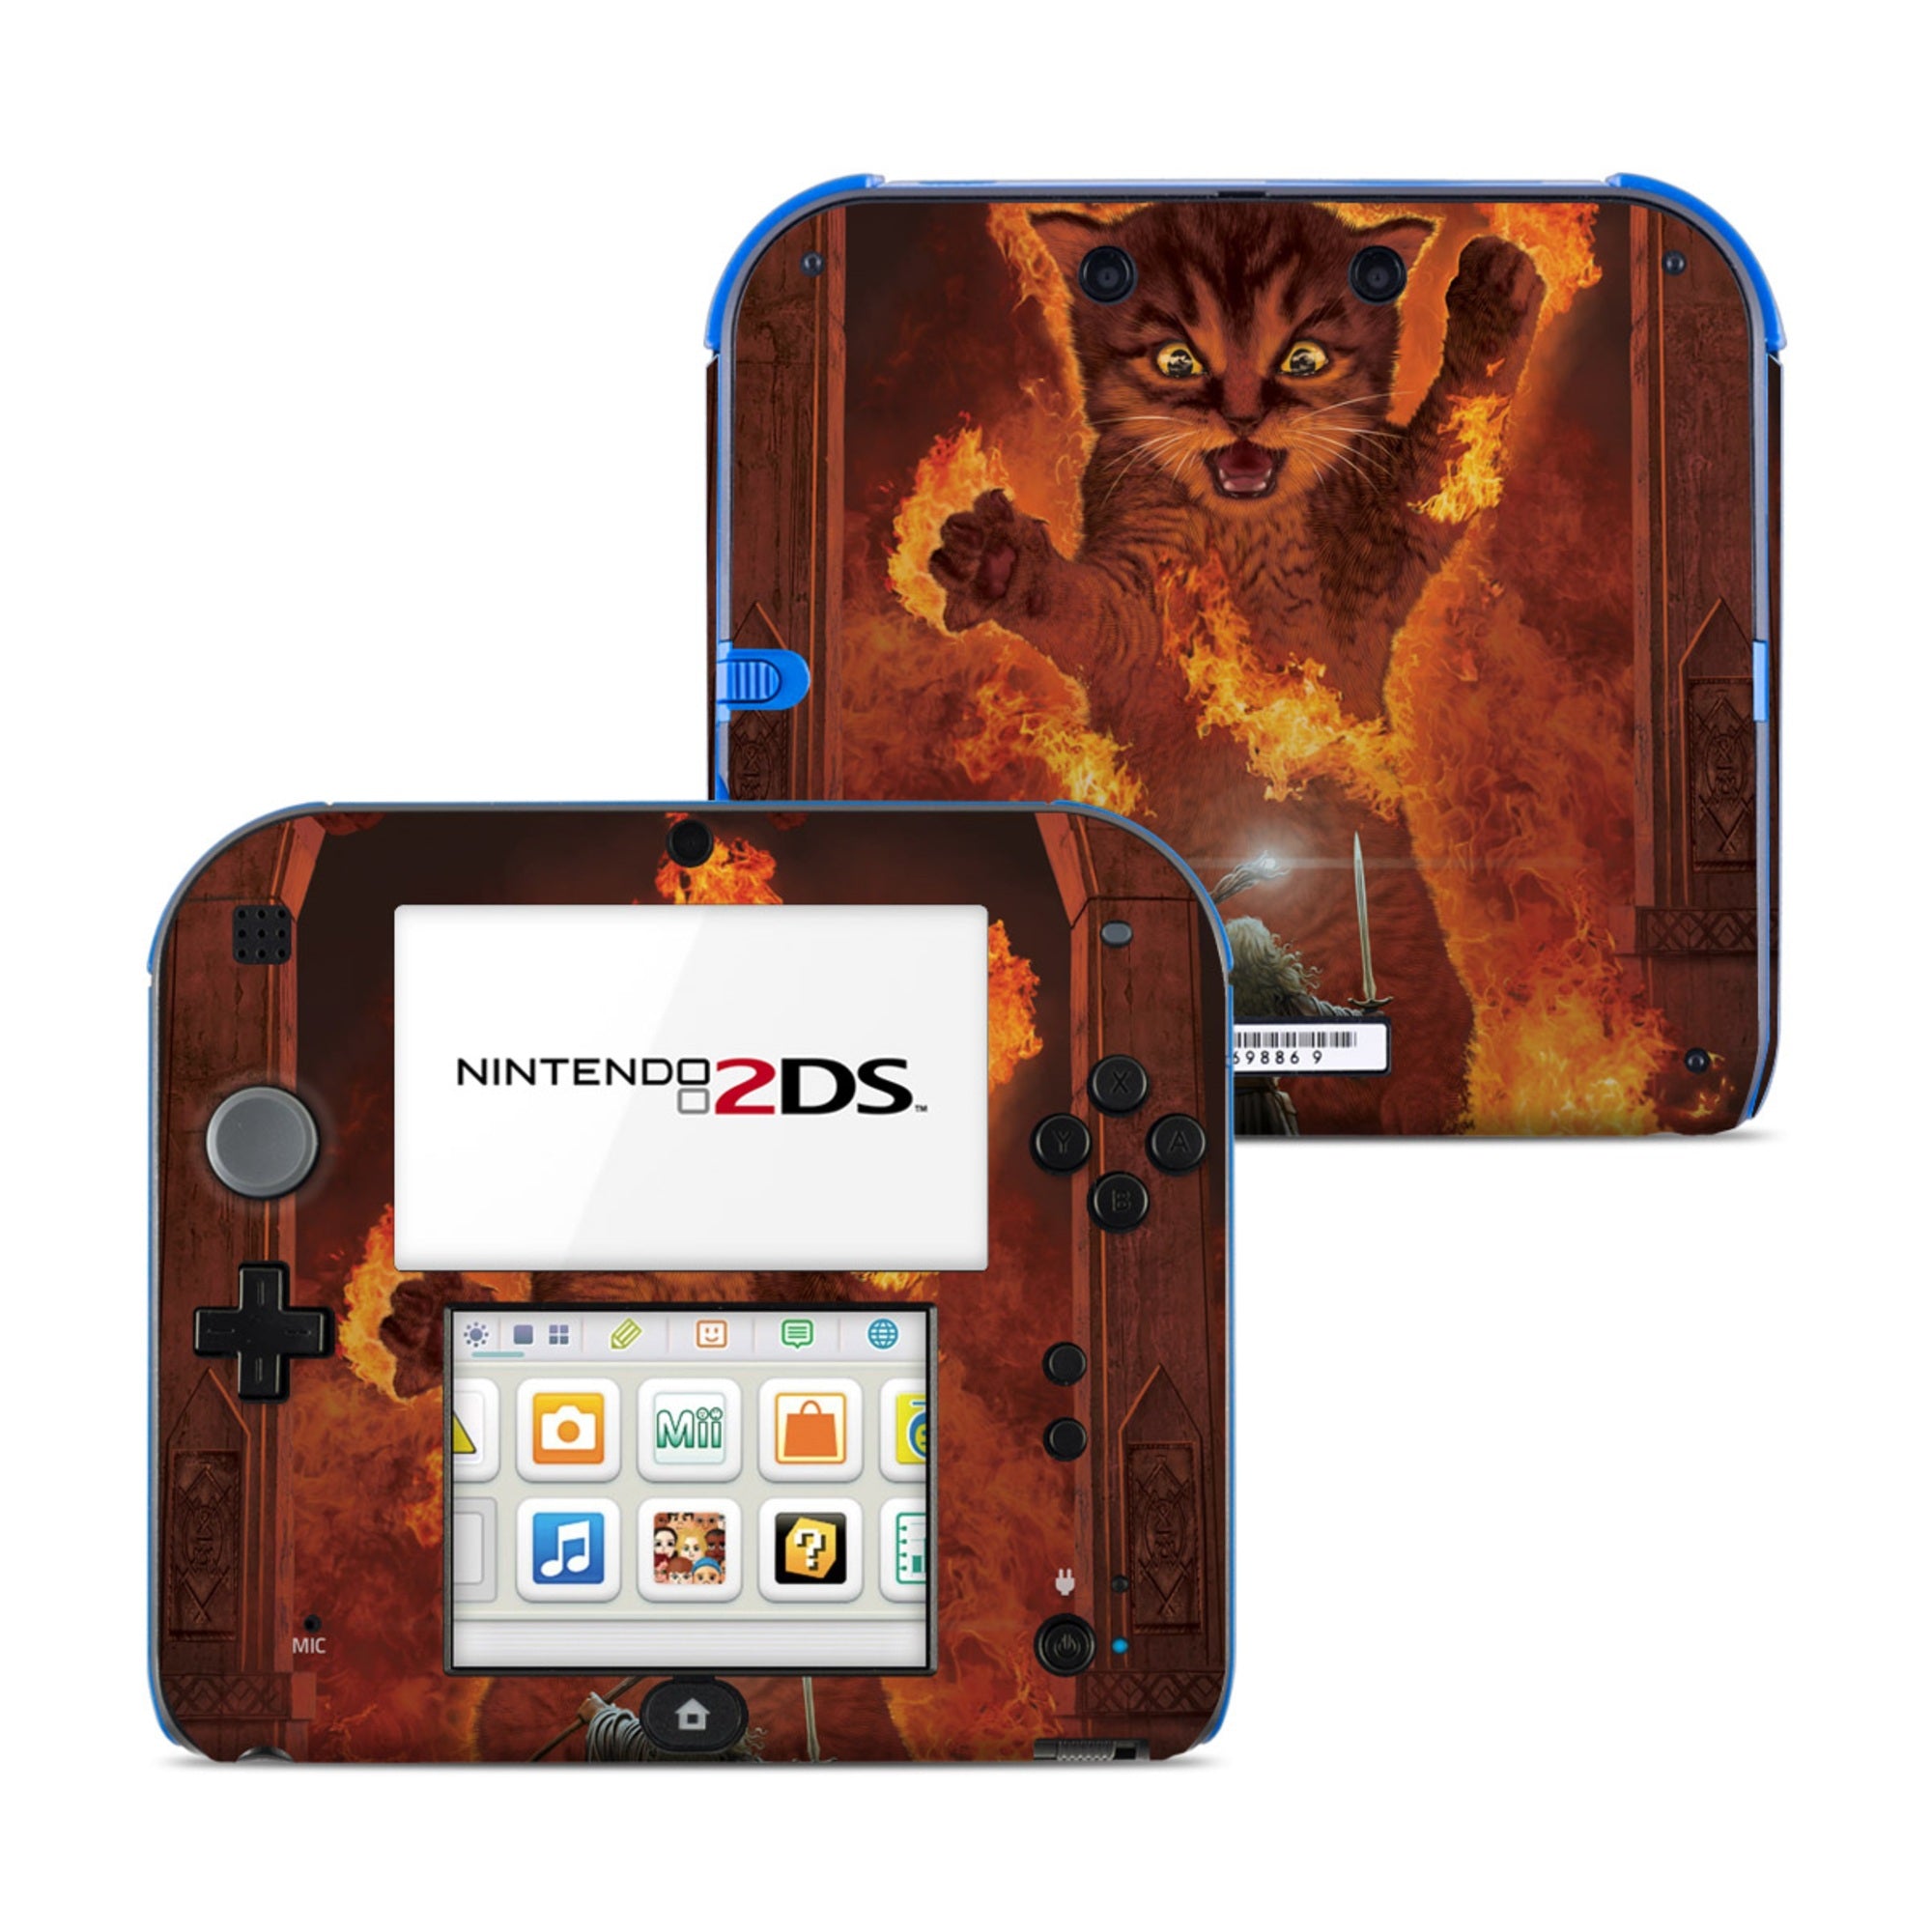 You Shall Not Pass - Nintendo 2DS Skin